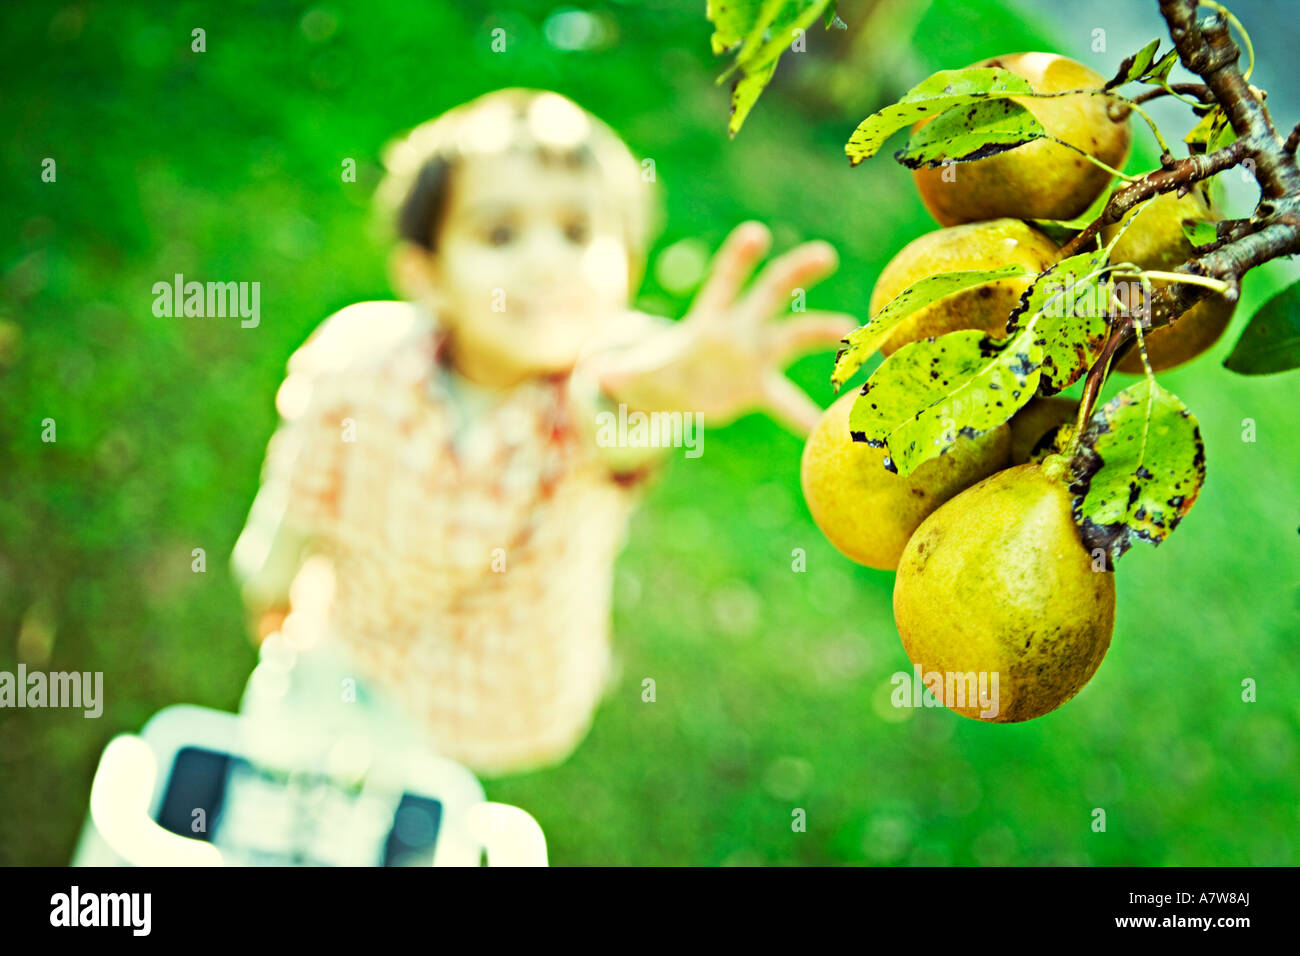 Child reaches up for pears on tree Stock Photo